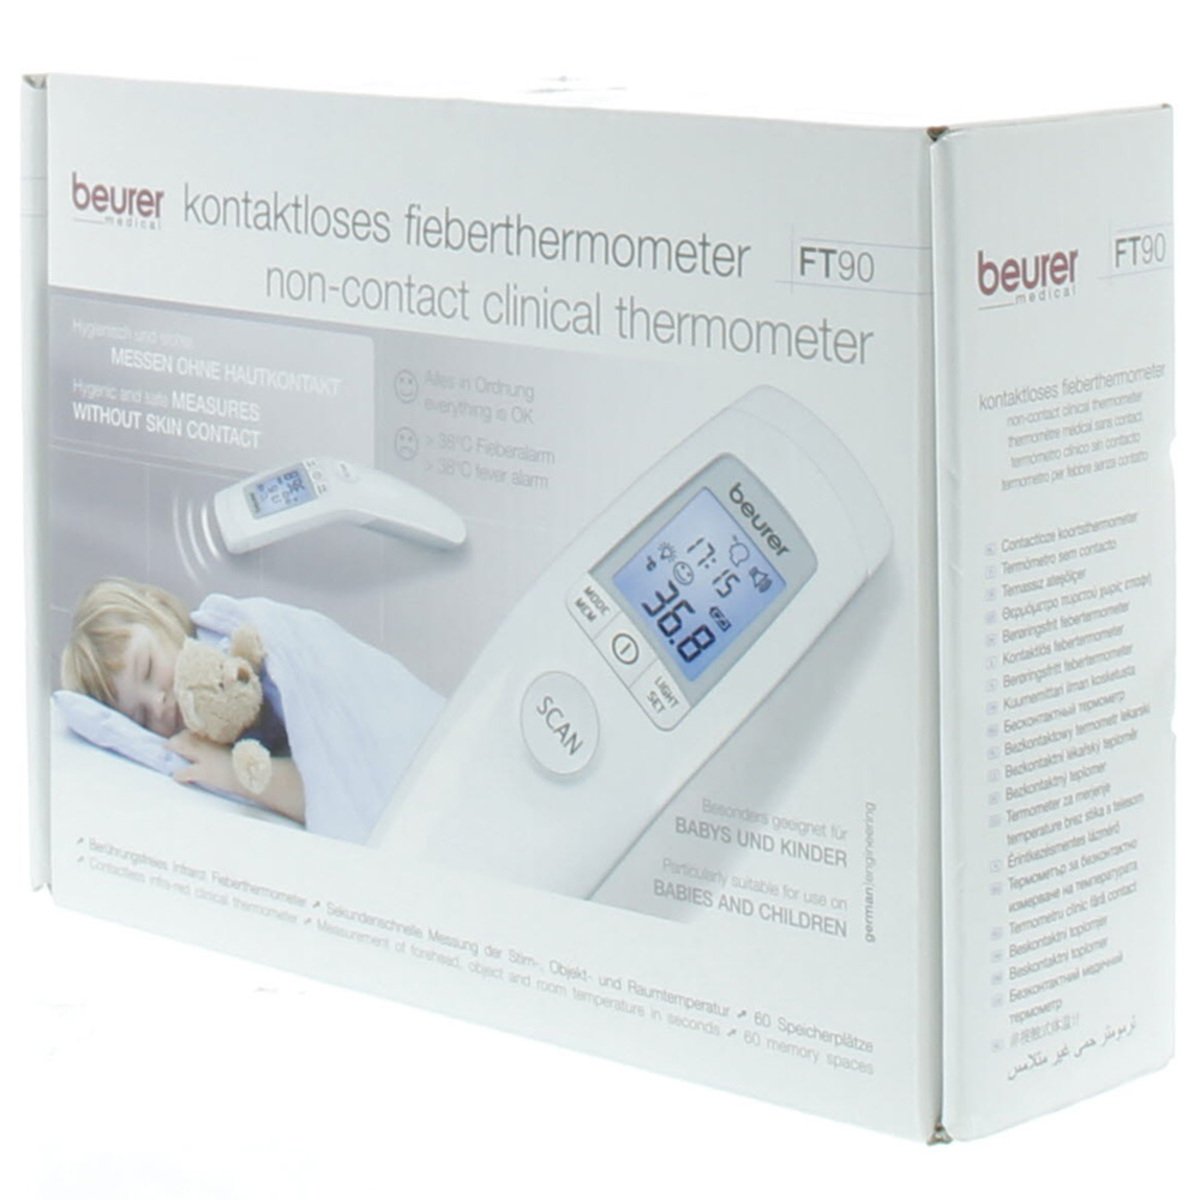 Beurer Thermometer FT90